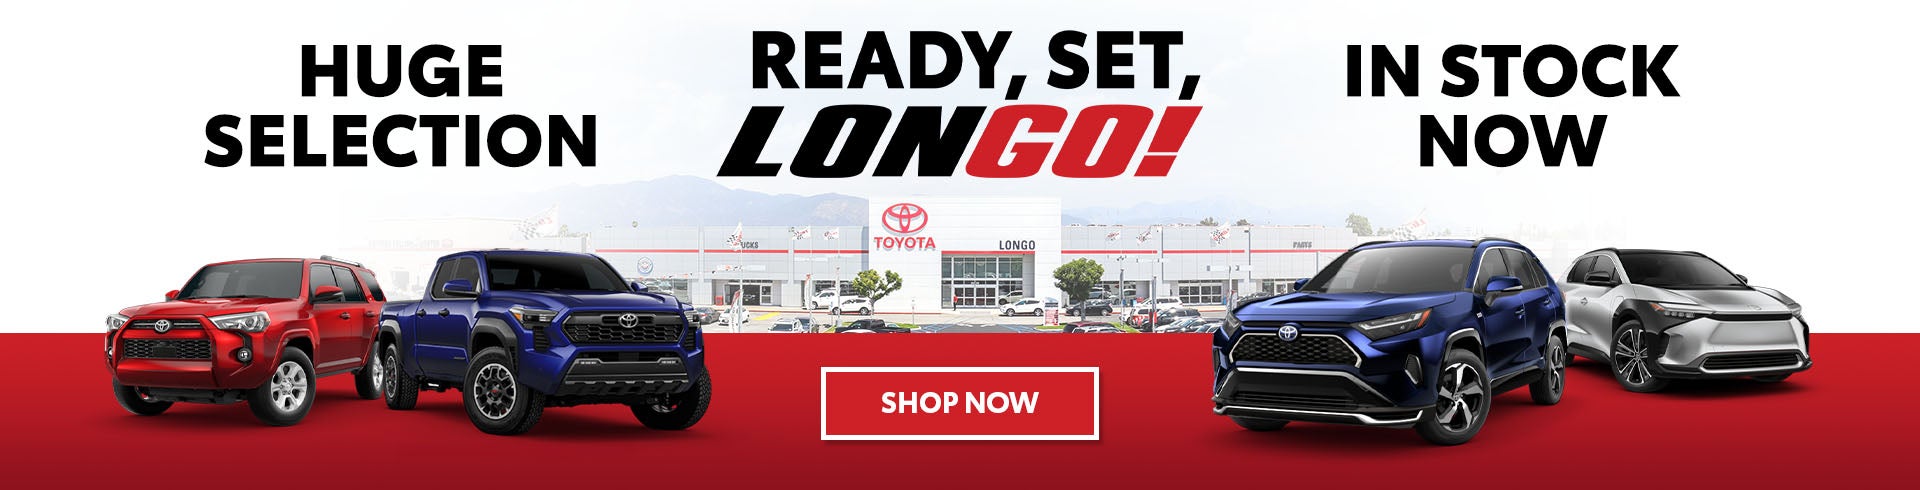 The Ready, Set, LonGO Event Is Going On Now!